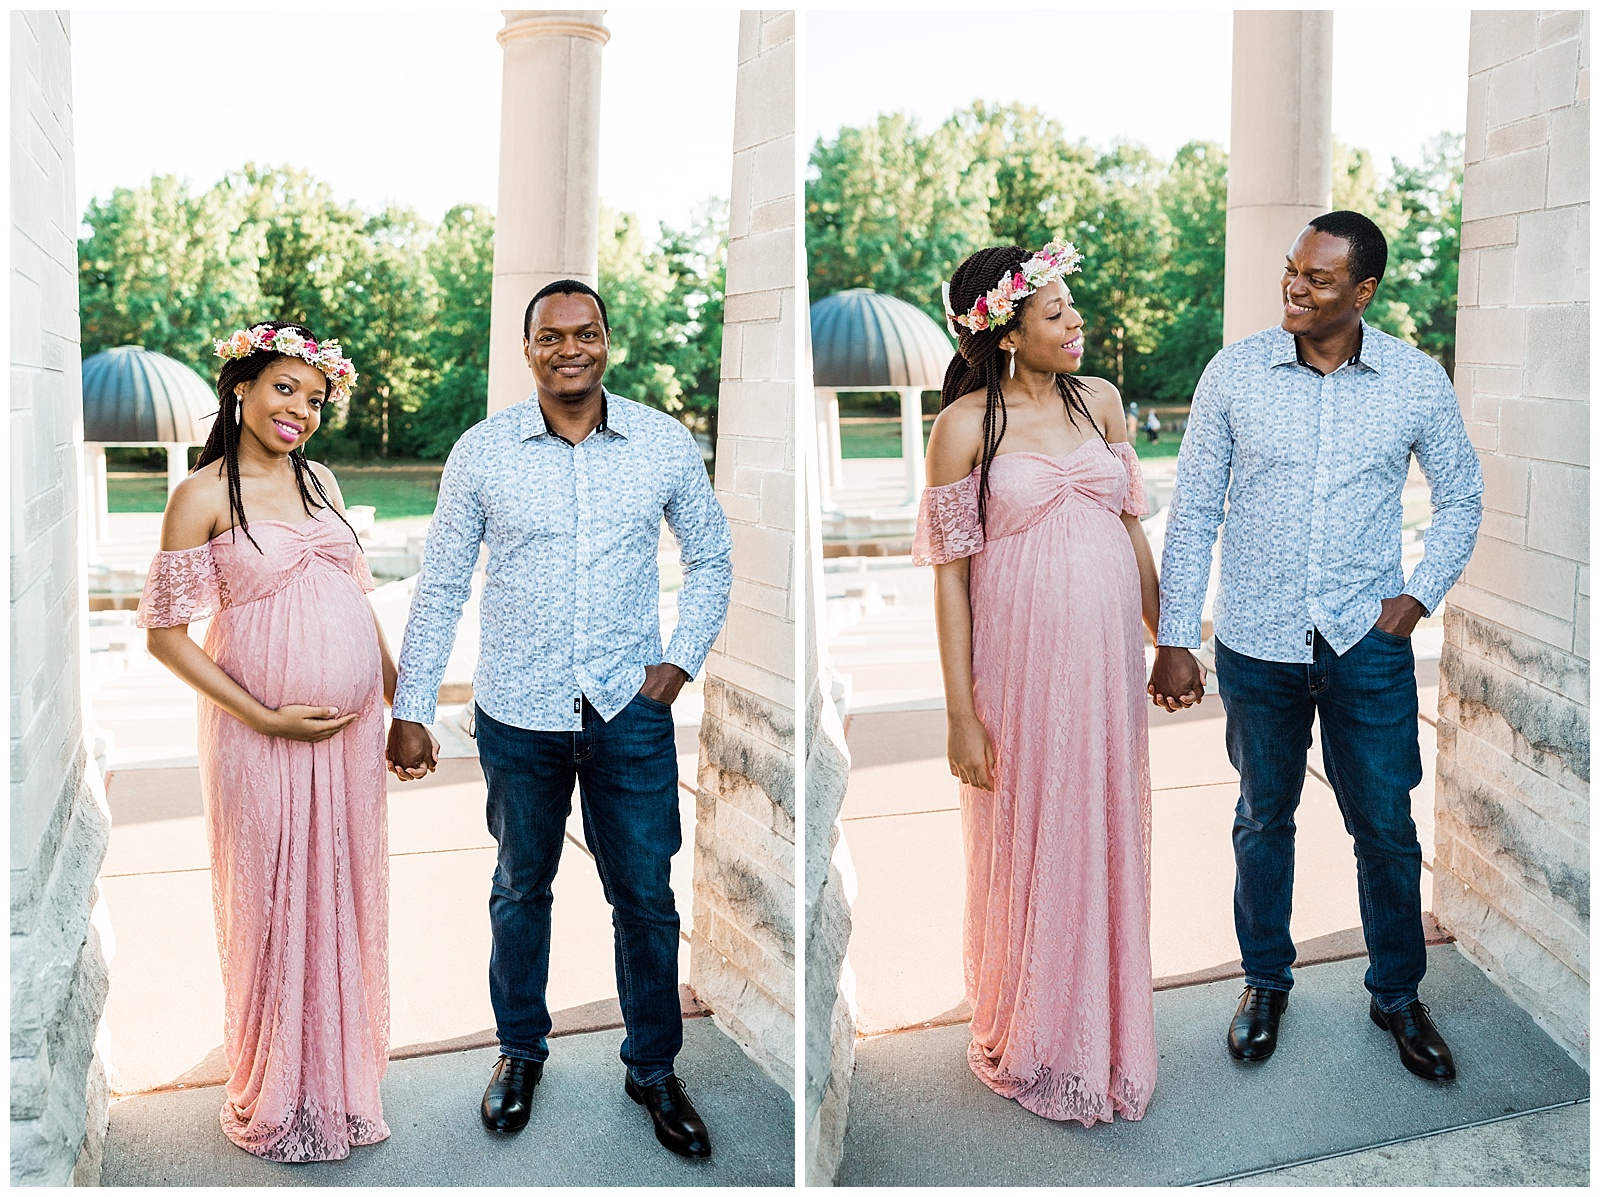 Indianapolis photographer, Indiana photographer, Maternity Session, Leah Rife Photo, Lace Maternity Dress, Maternity outfit ideas, Coxhall Gardens, Indianapolis Maternity Session, Indiana Lifestyle Photographer, Indianapolis family photographer